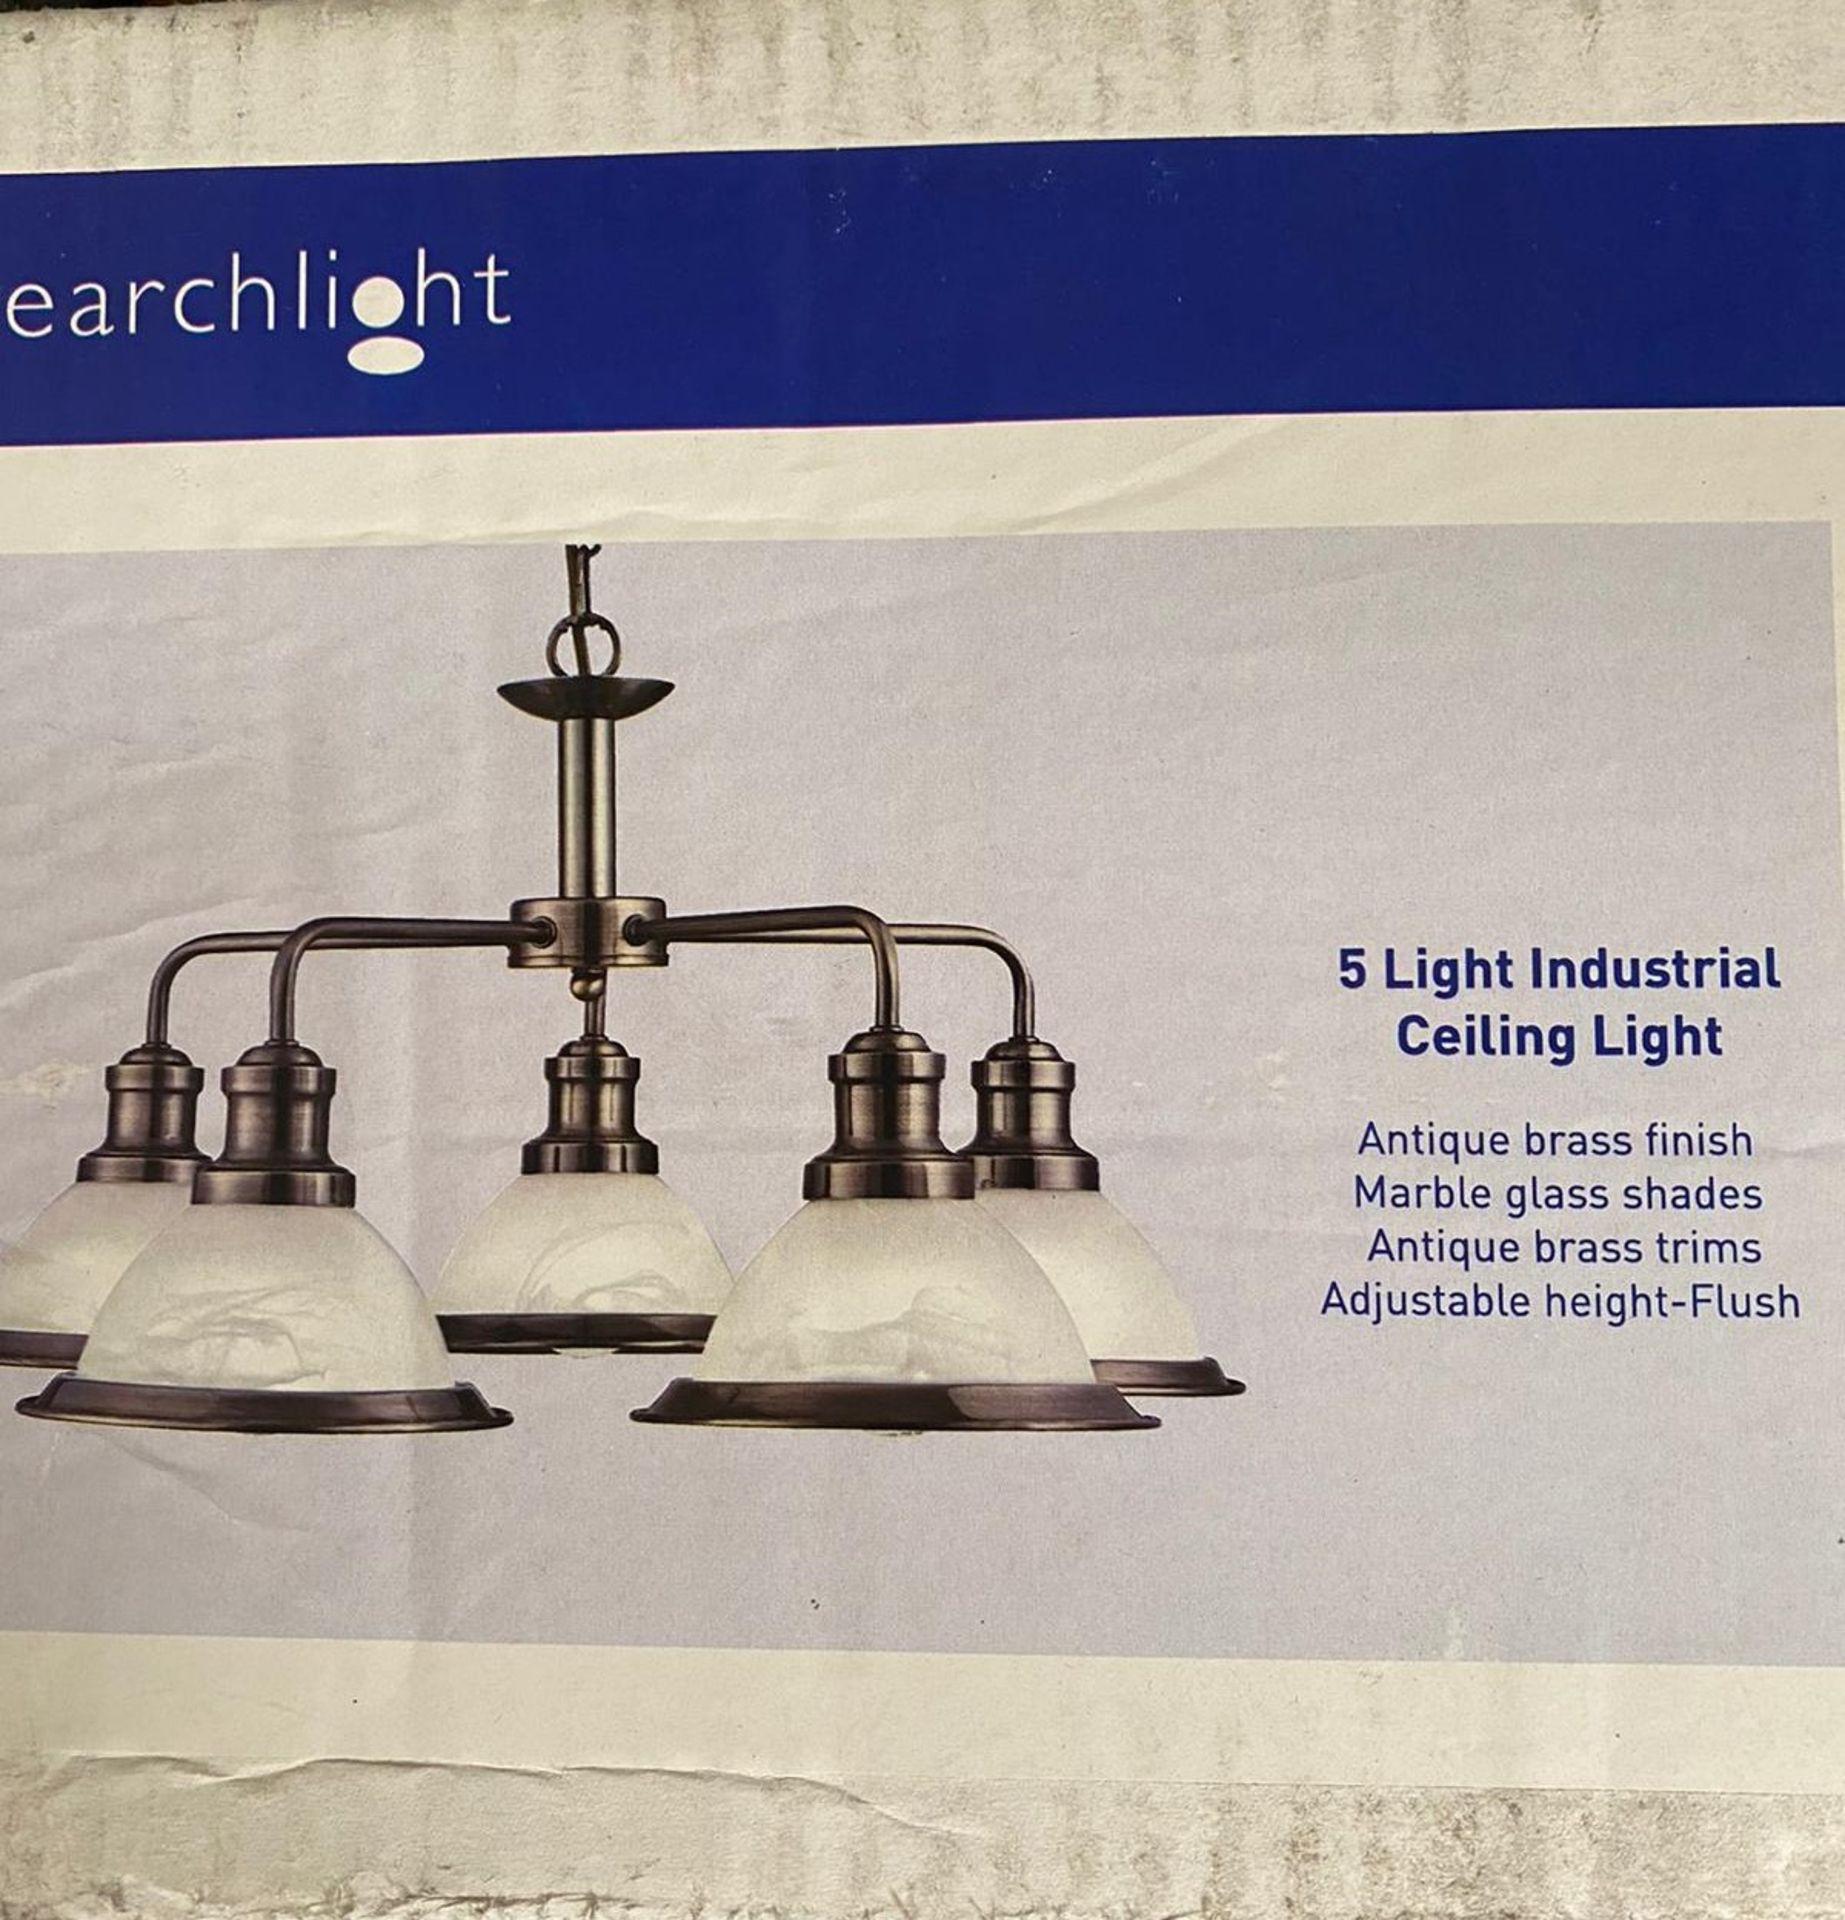 1 x Searchlight Industrial Ceiling Light in Antique Brass - Ref: 1595-5AB -New and Boxed - RRP: £150 - Image 3 of 5